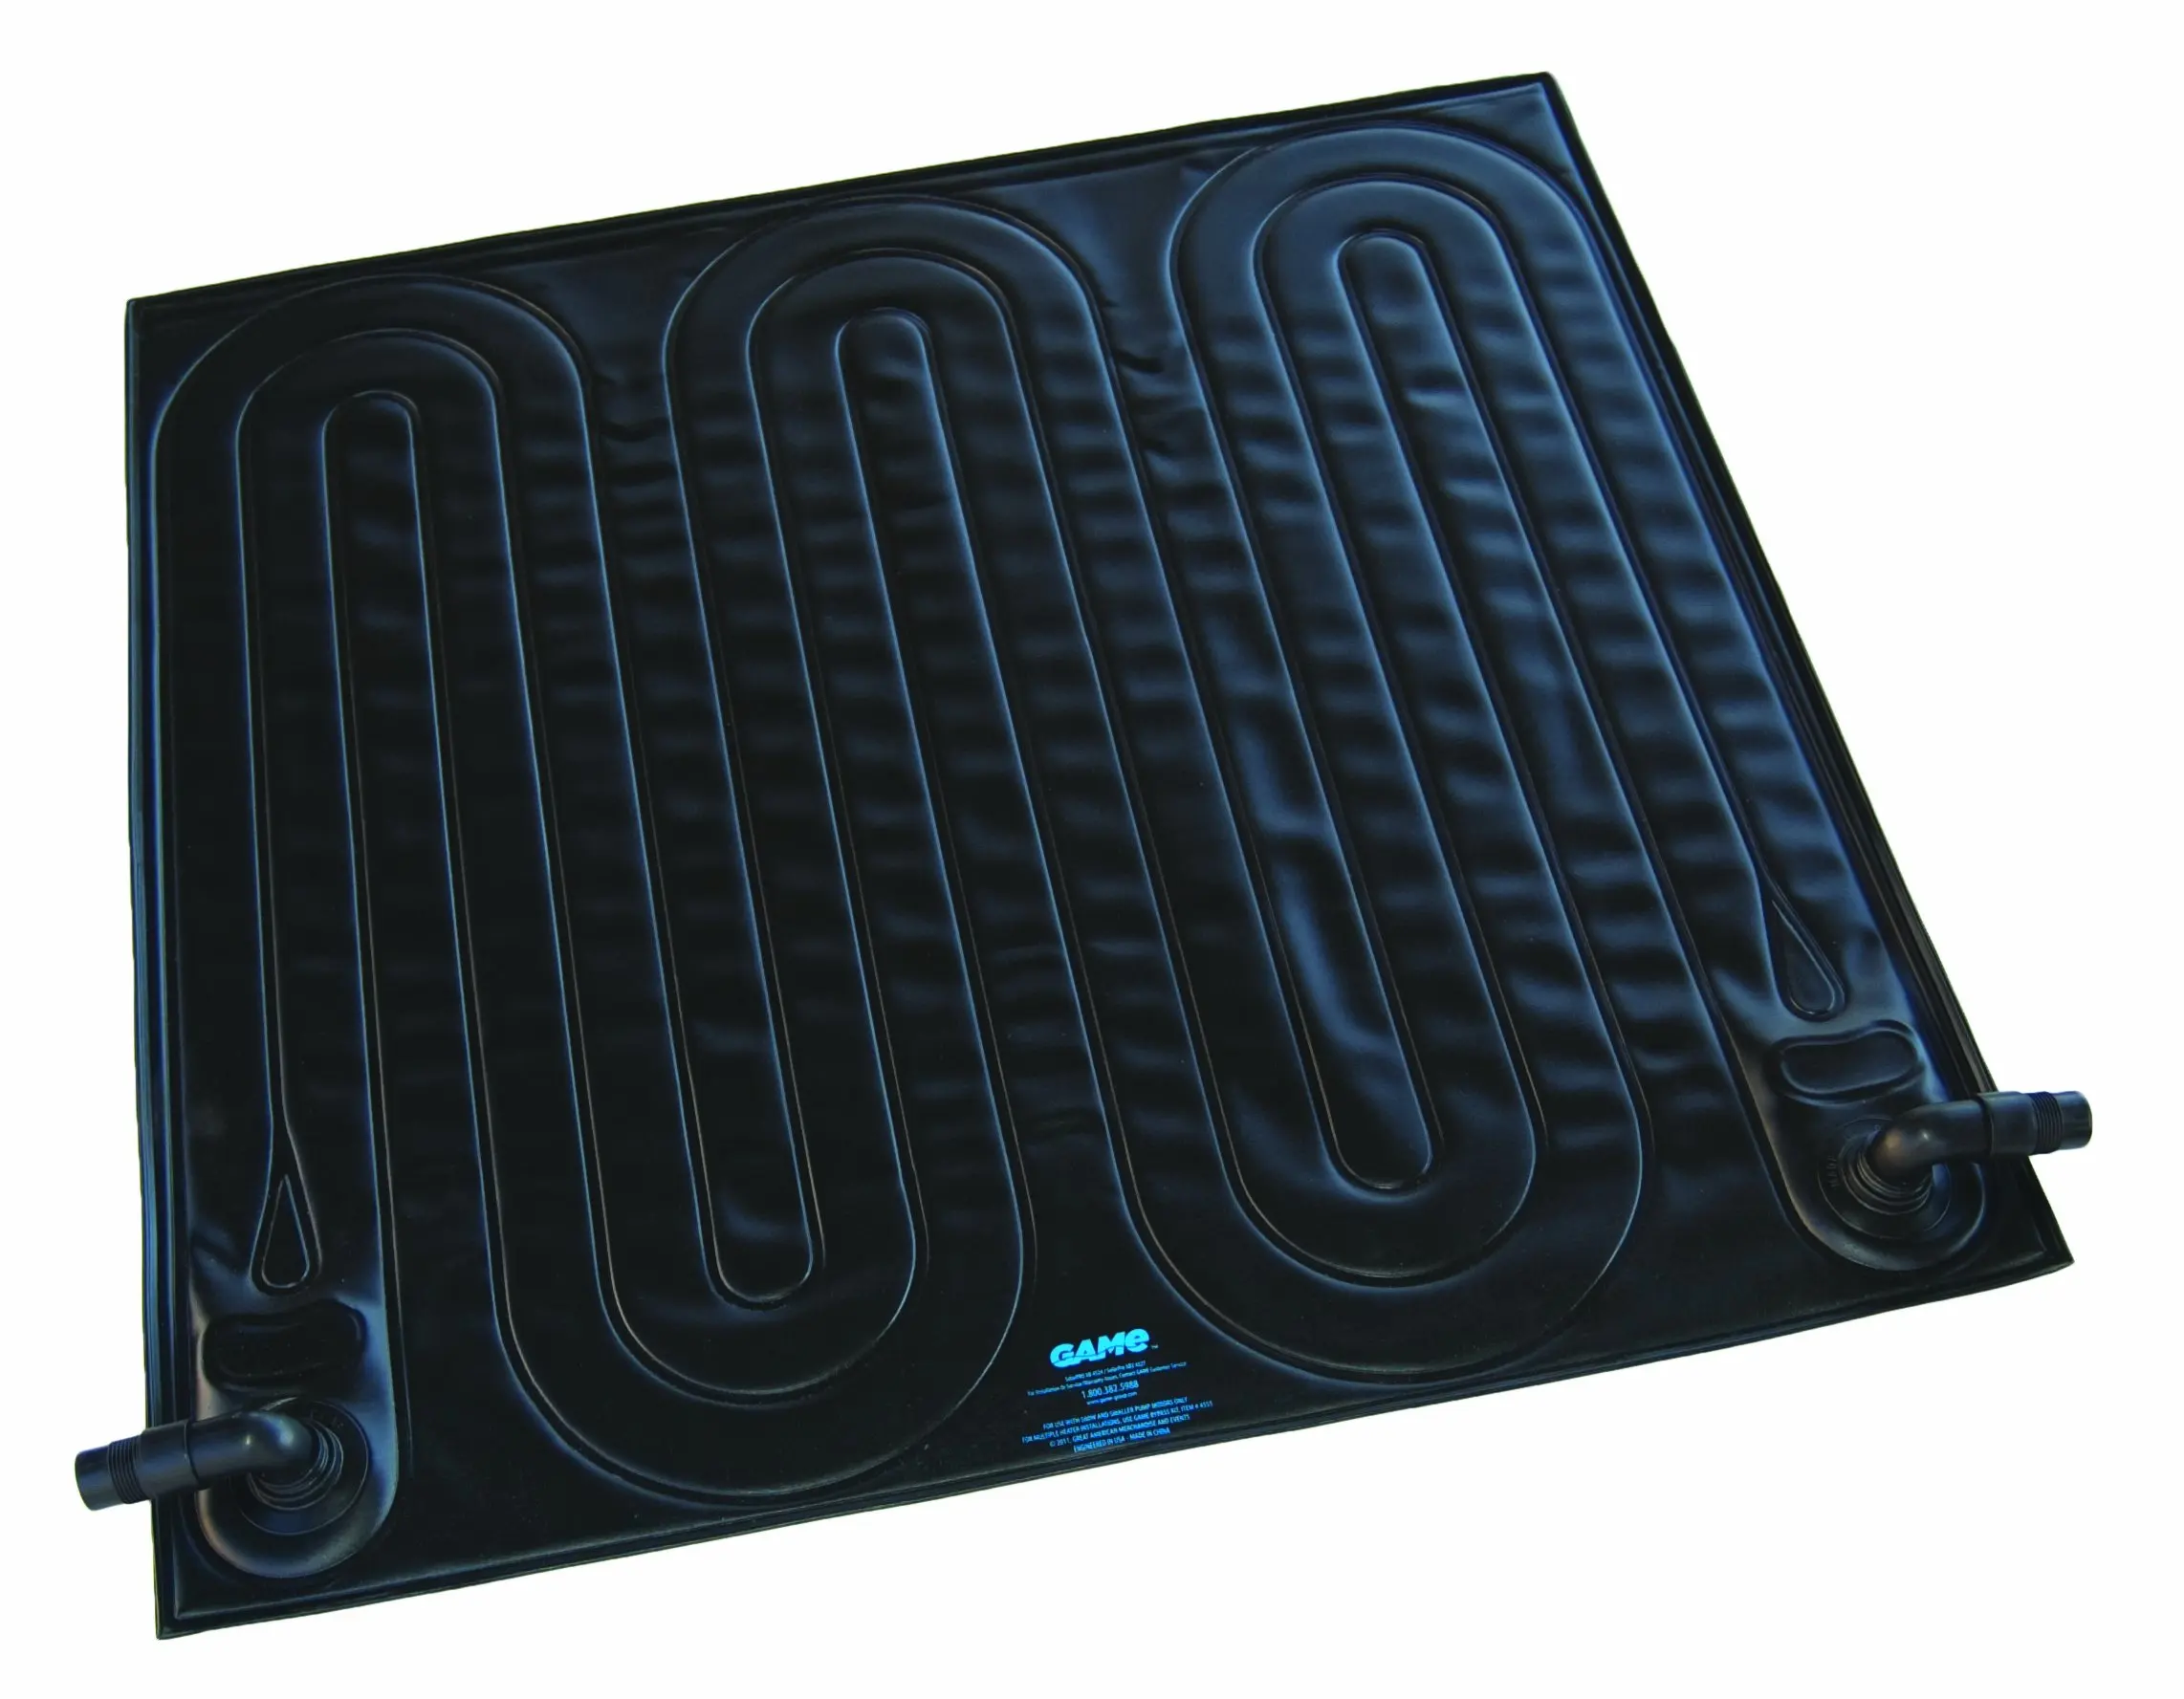 Unique Game Solarpro Curve Heater For Above Ground Swimming Pools News Update